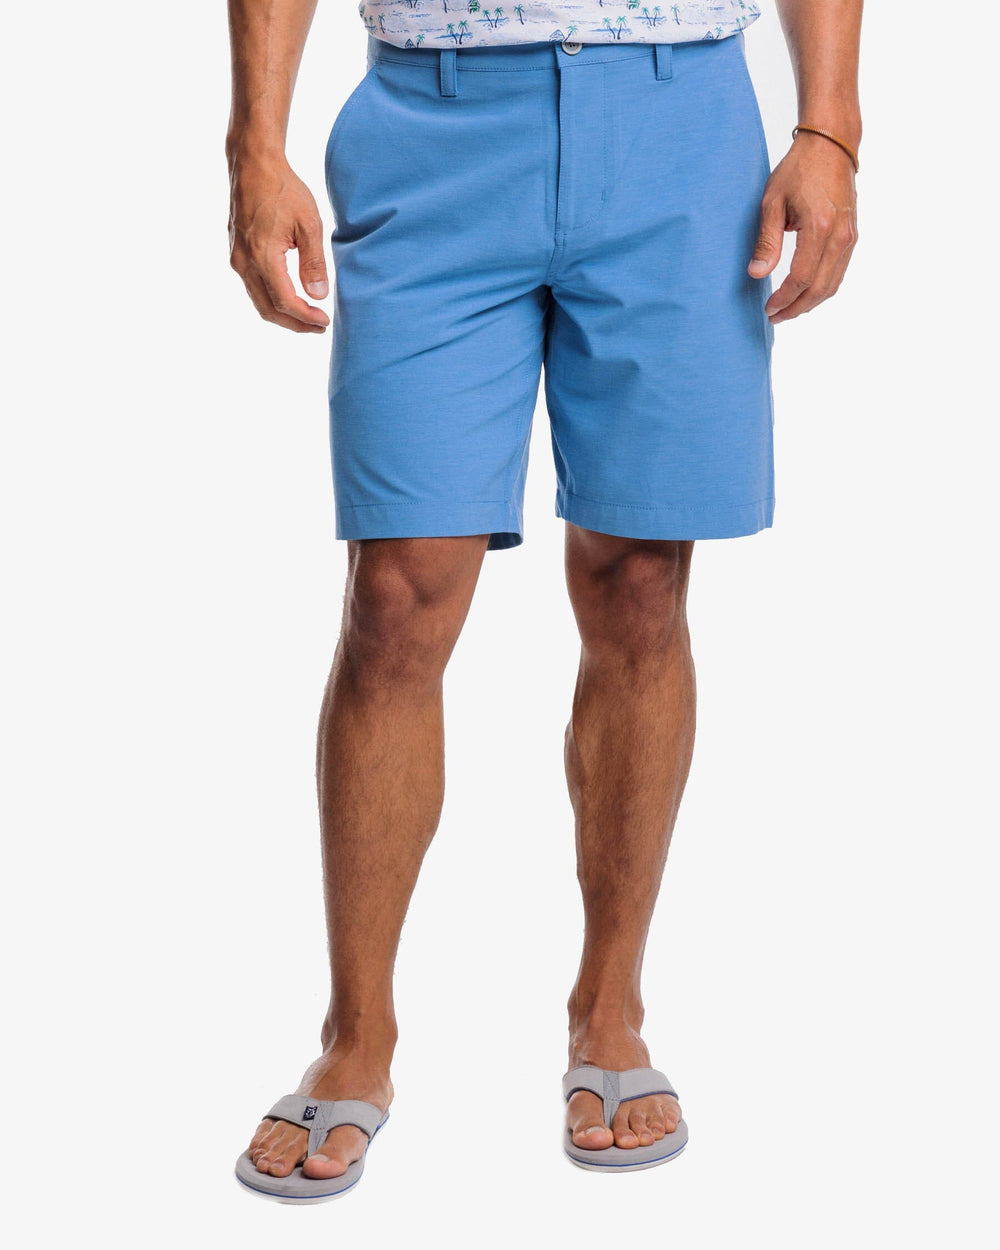 The front view of the Southern Tide Heathered T3 Gulf 9 Inch Performance Short by Southern Tide - Heather Atlantic Blue